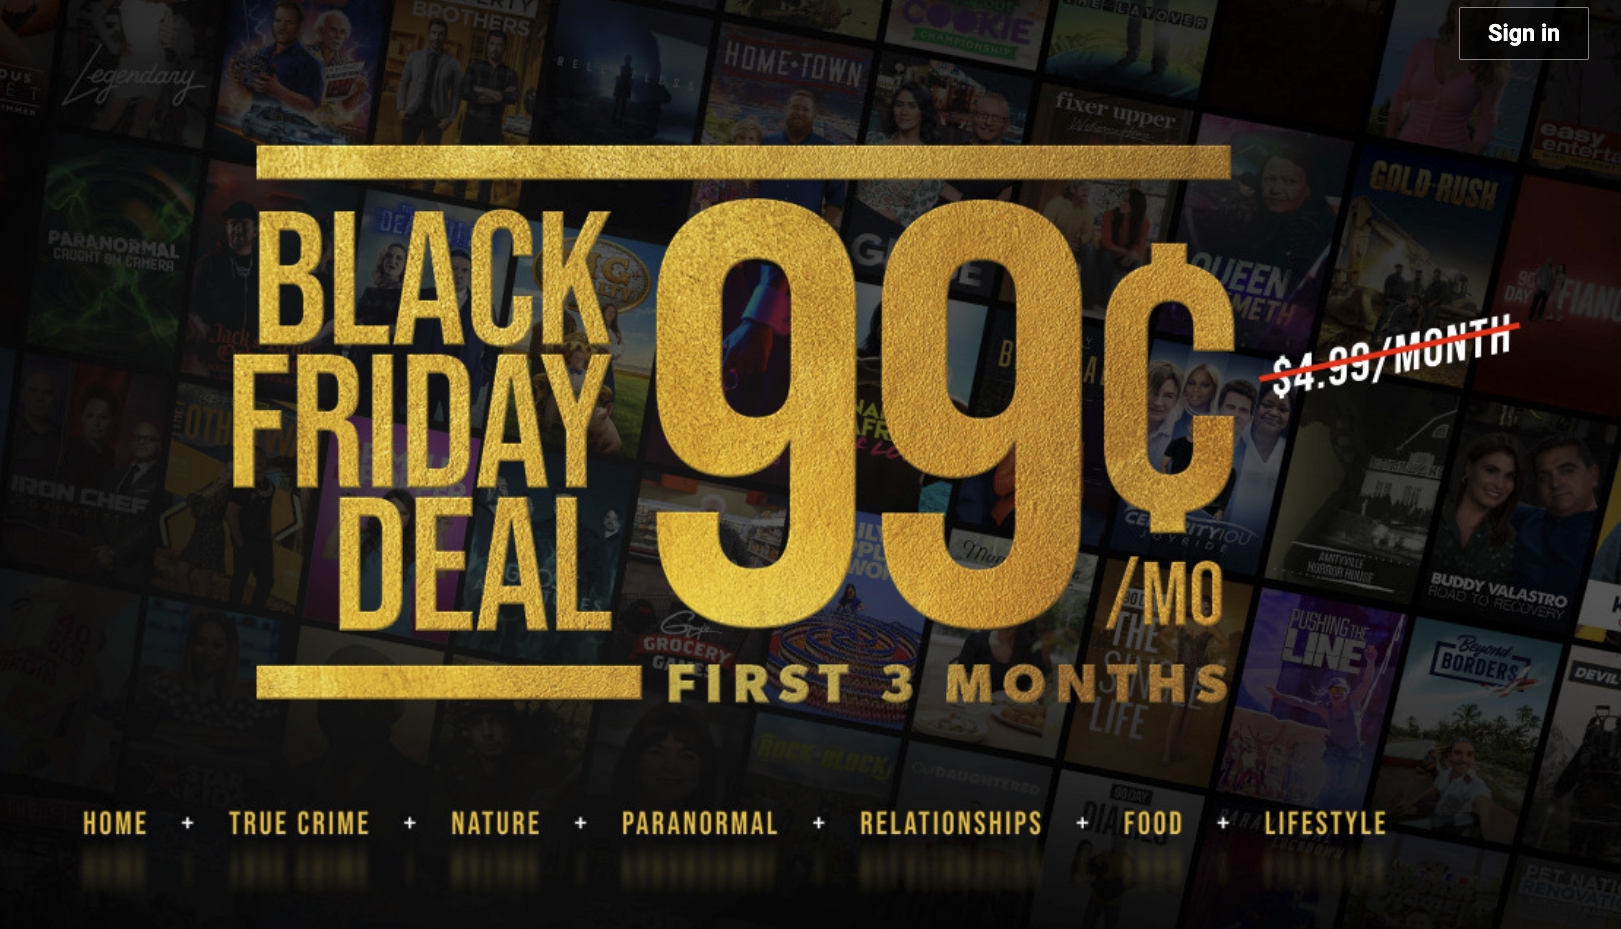 text on image that says &quot;Black Friday Deal 99 cents per month for the first three months&quot;